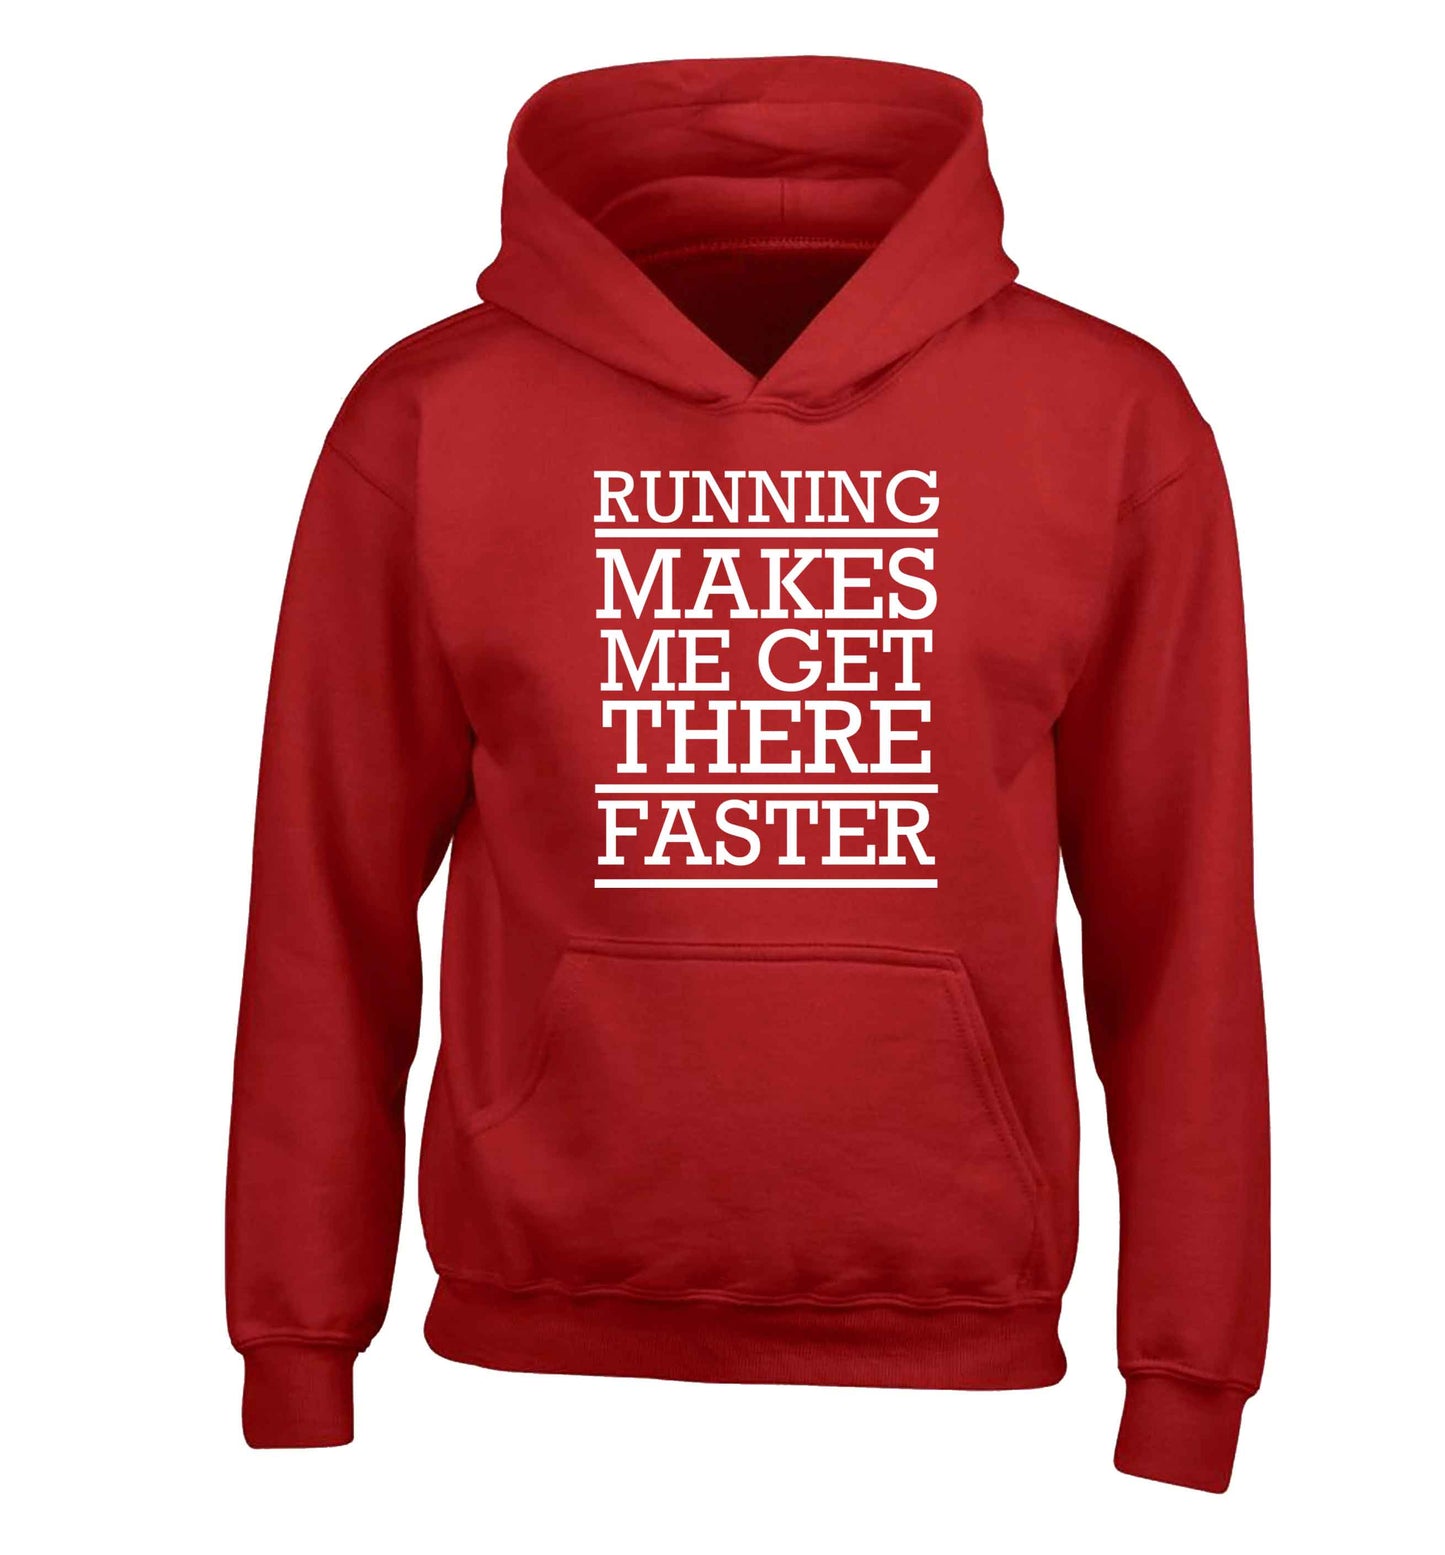 Running makes me get there faster children's red hoodie 12-13 Years